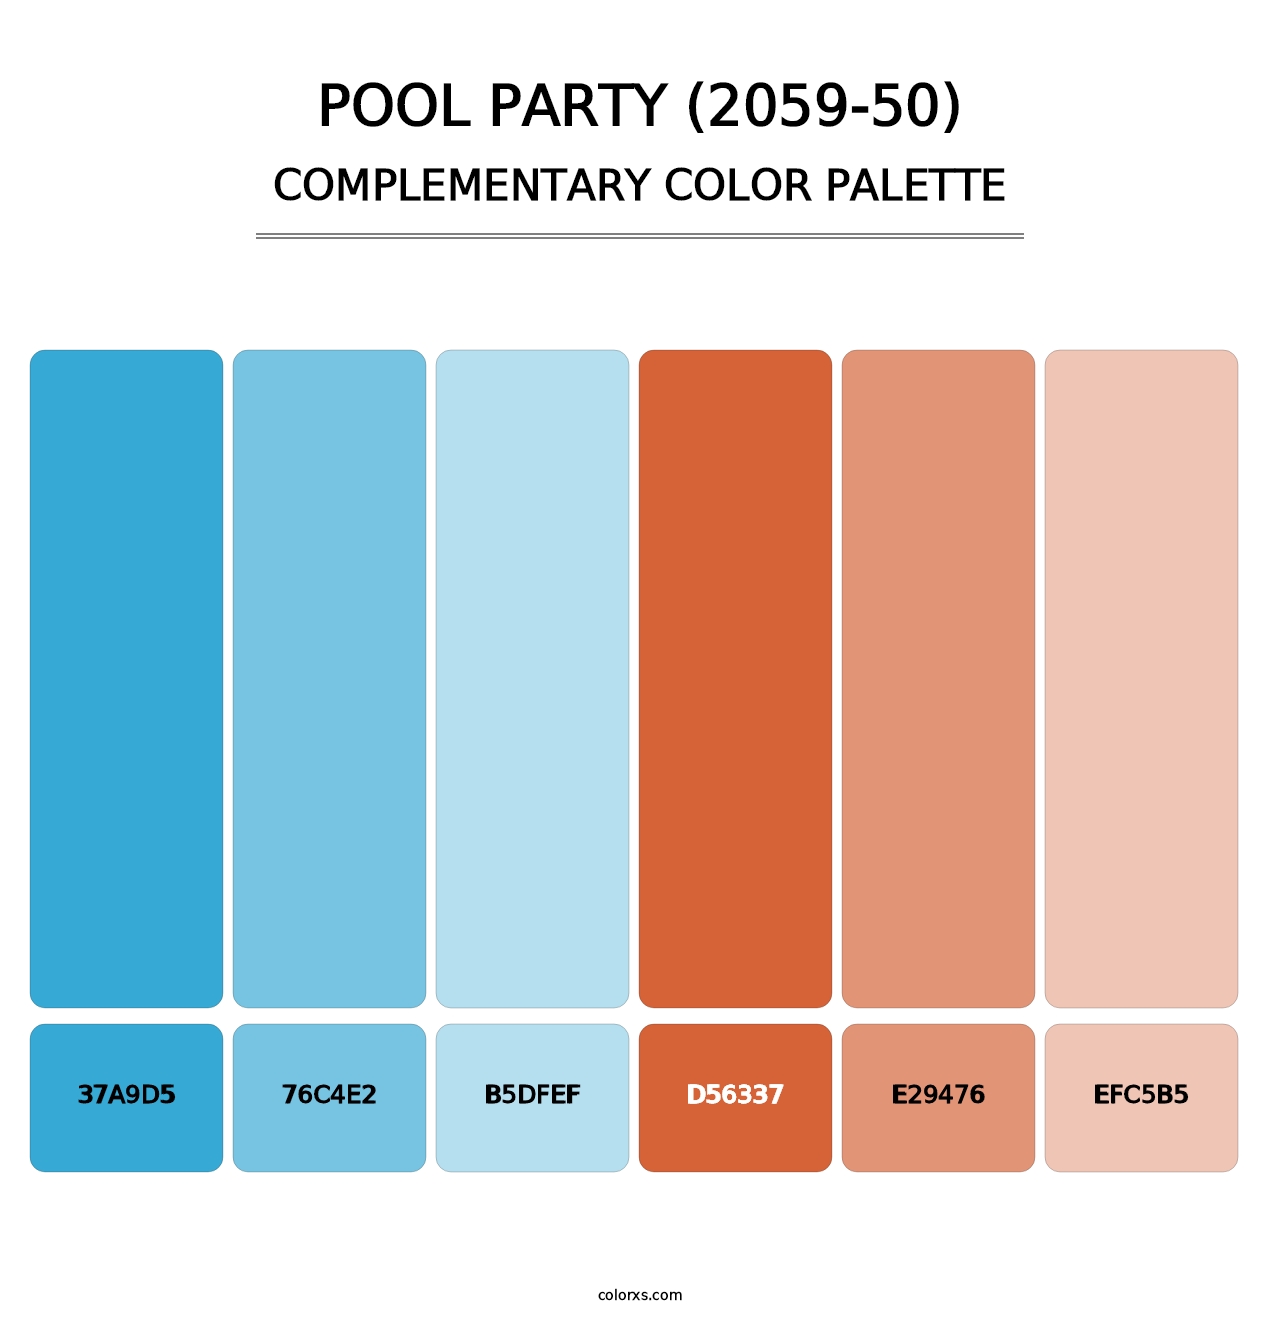 Pool Party (2059-50) - Complementary Color Palette